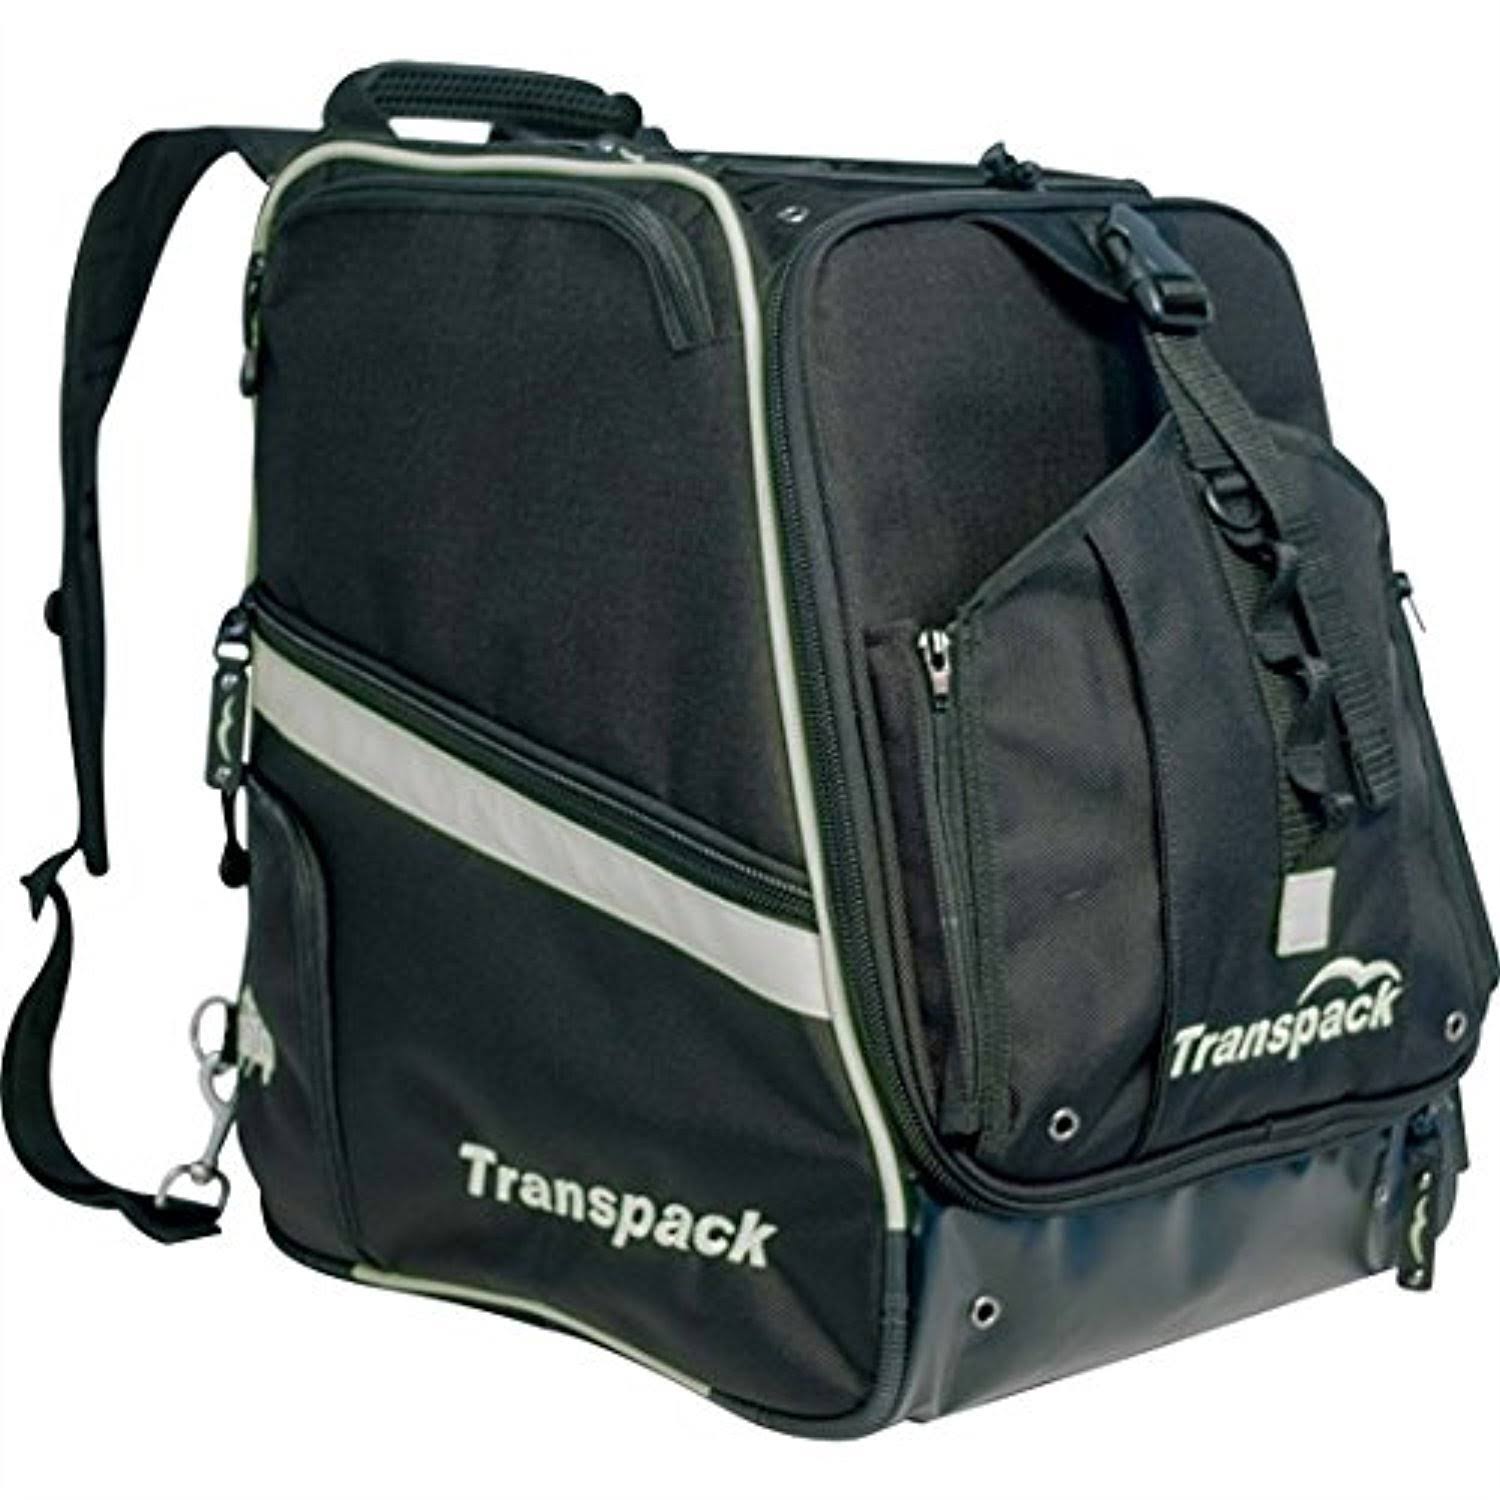 Transpack Heated Pro Boot Bag, Black/Silver Electric